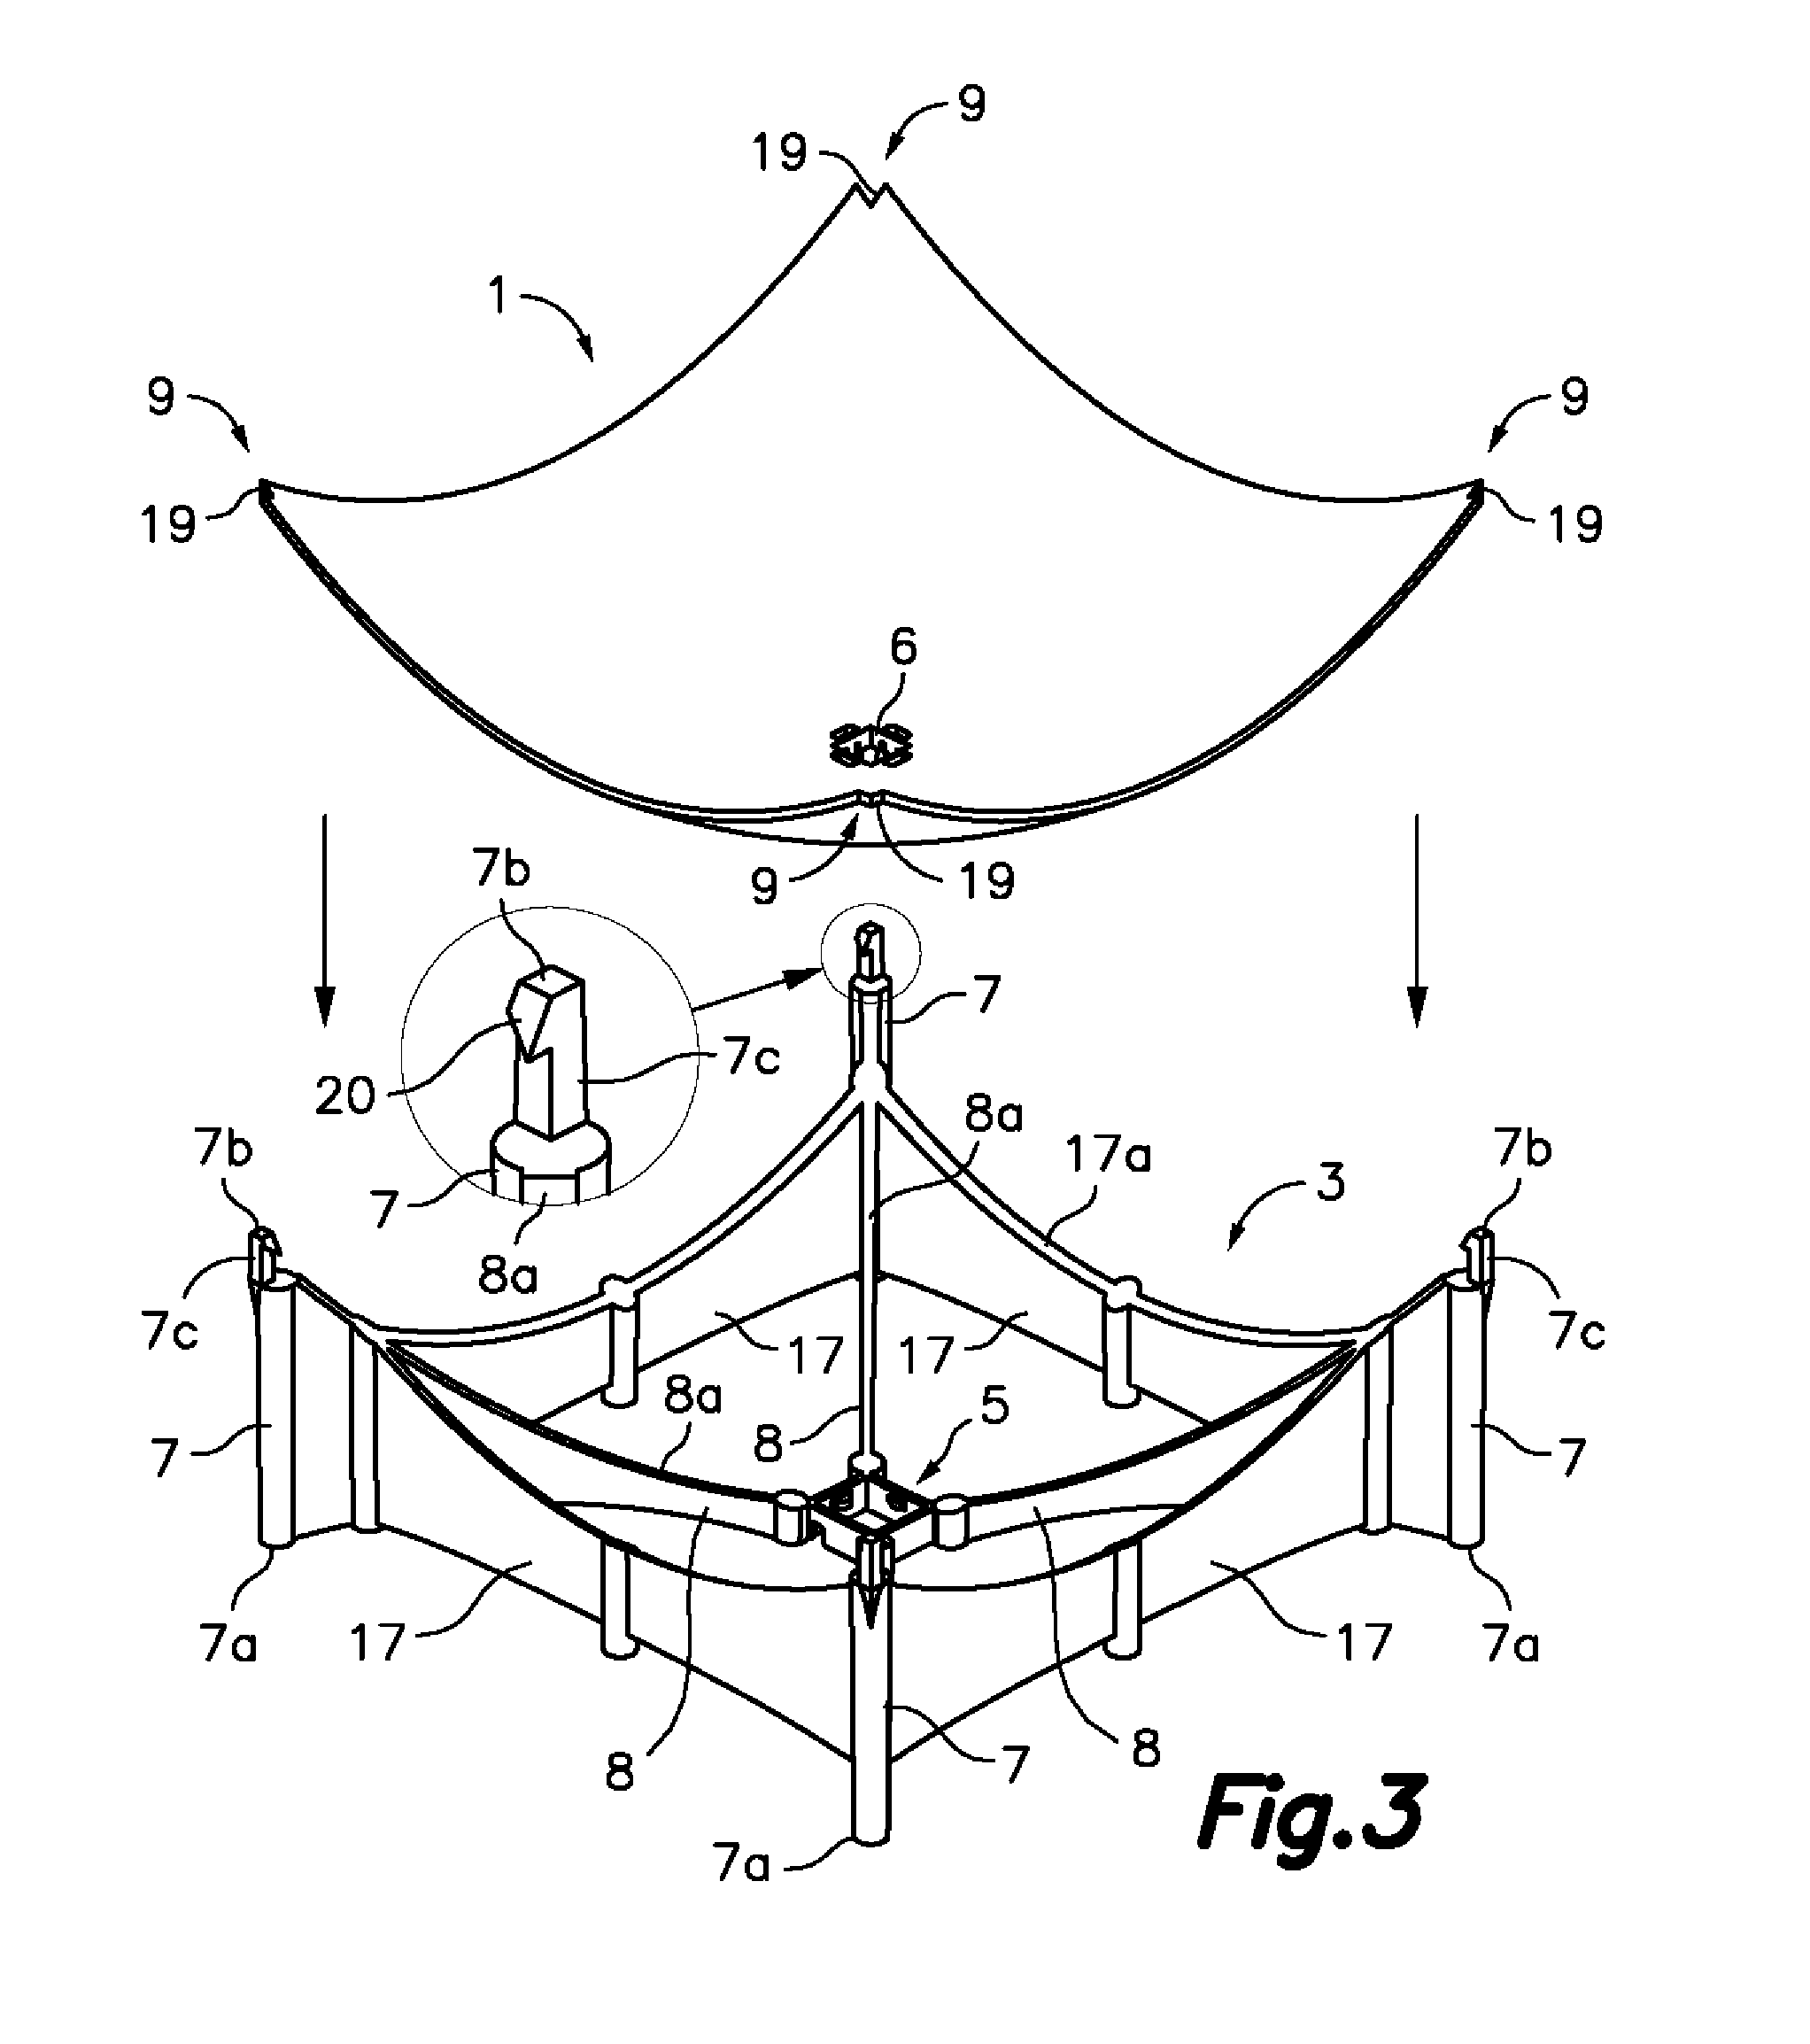 Solar-energy collector/concentrator with cassegrain-type optics